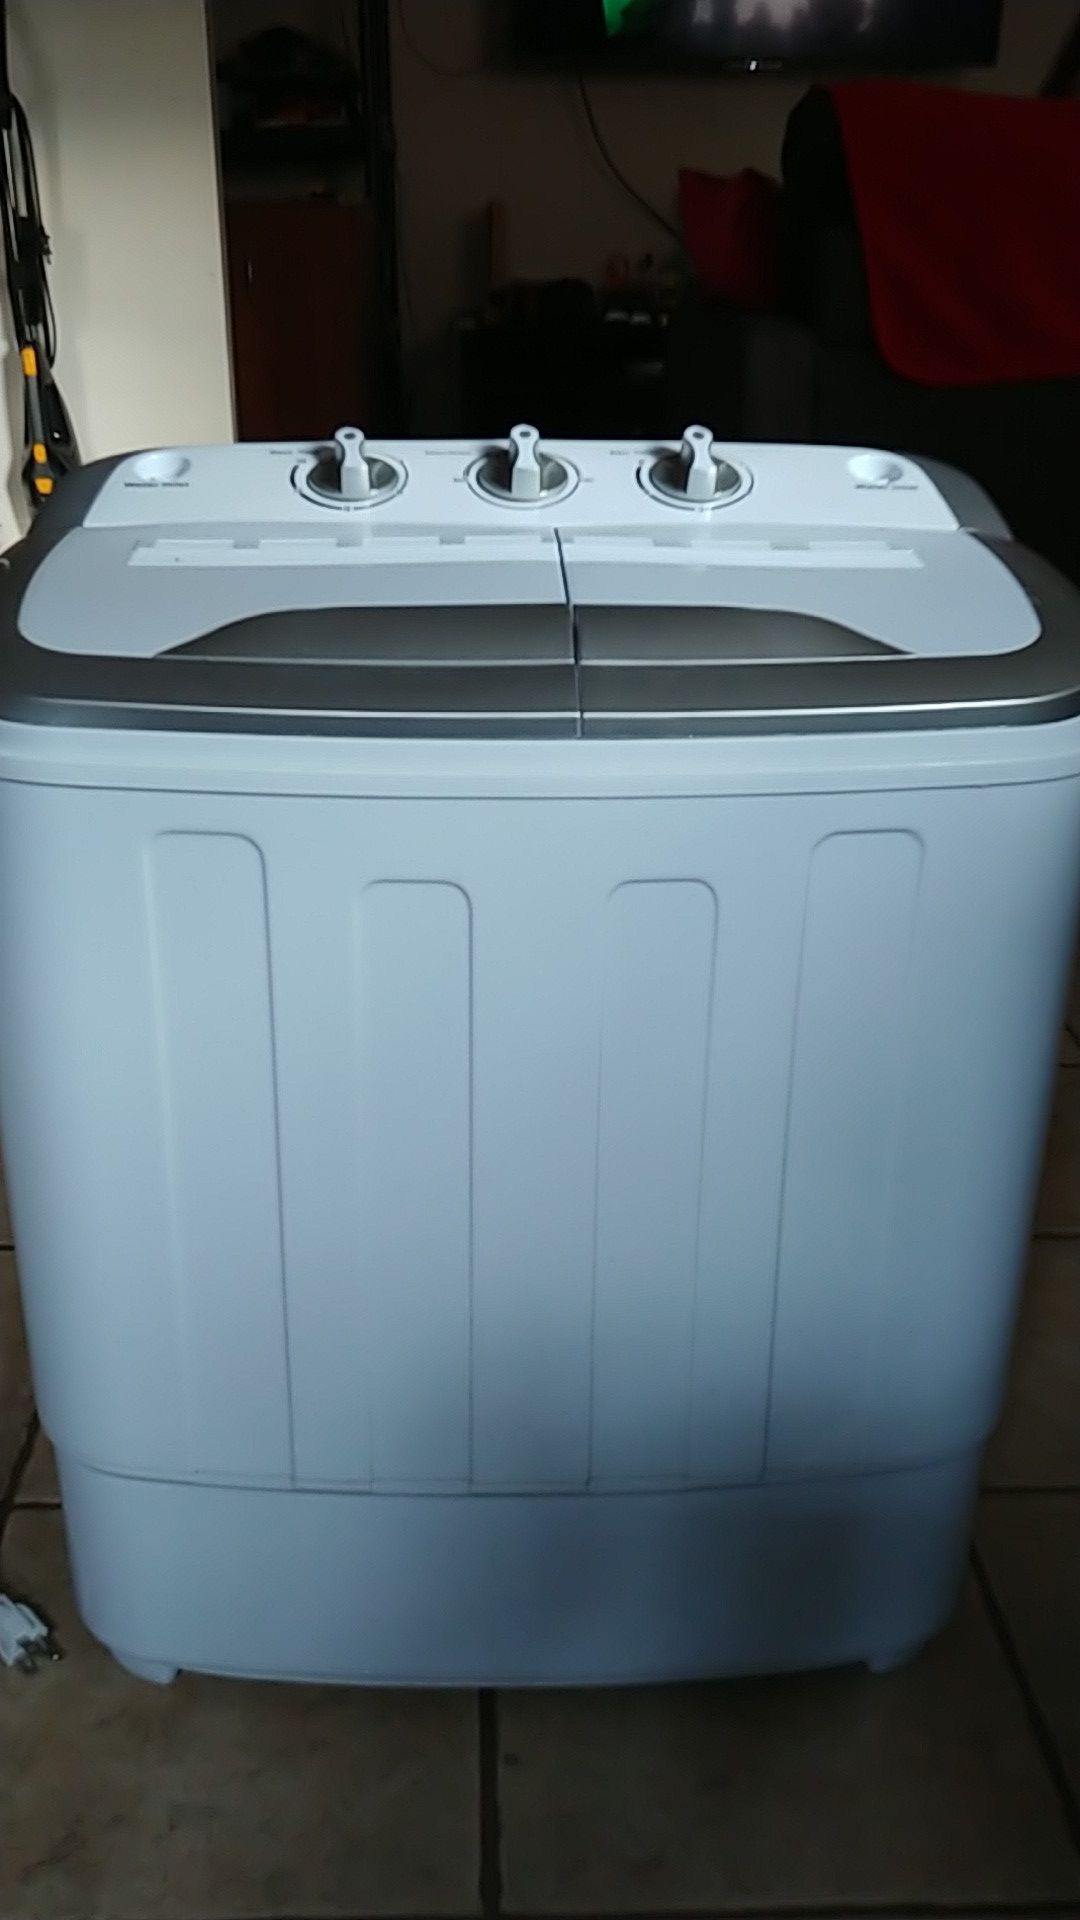 Portable Washer & Dryer